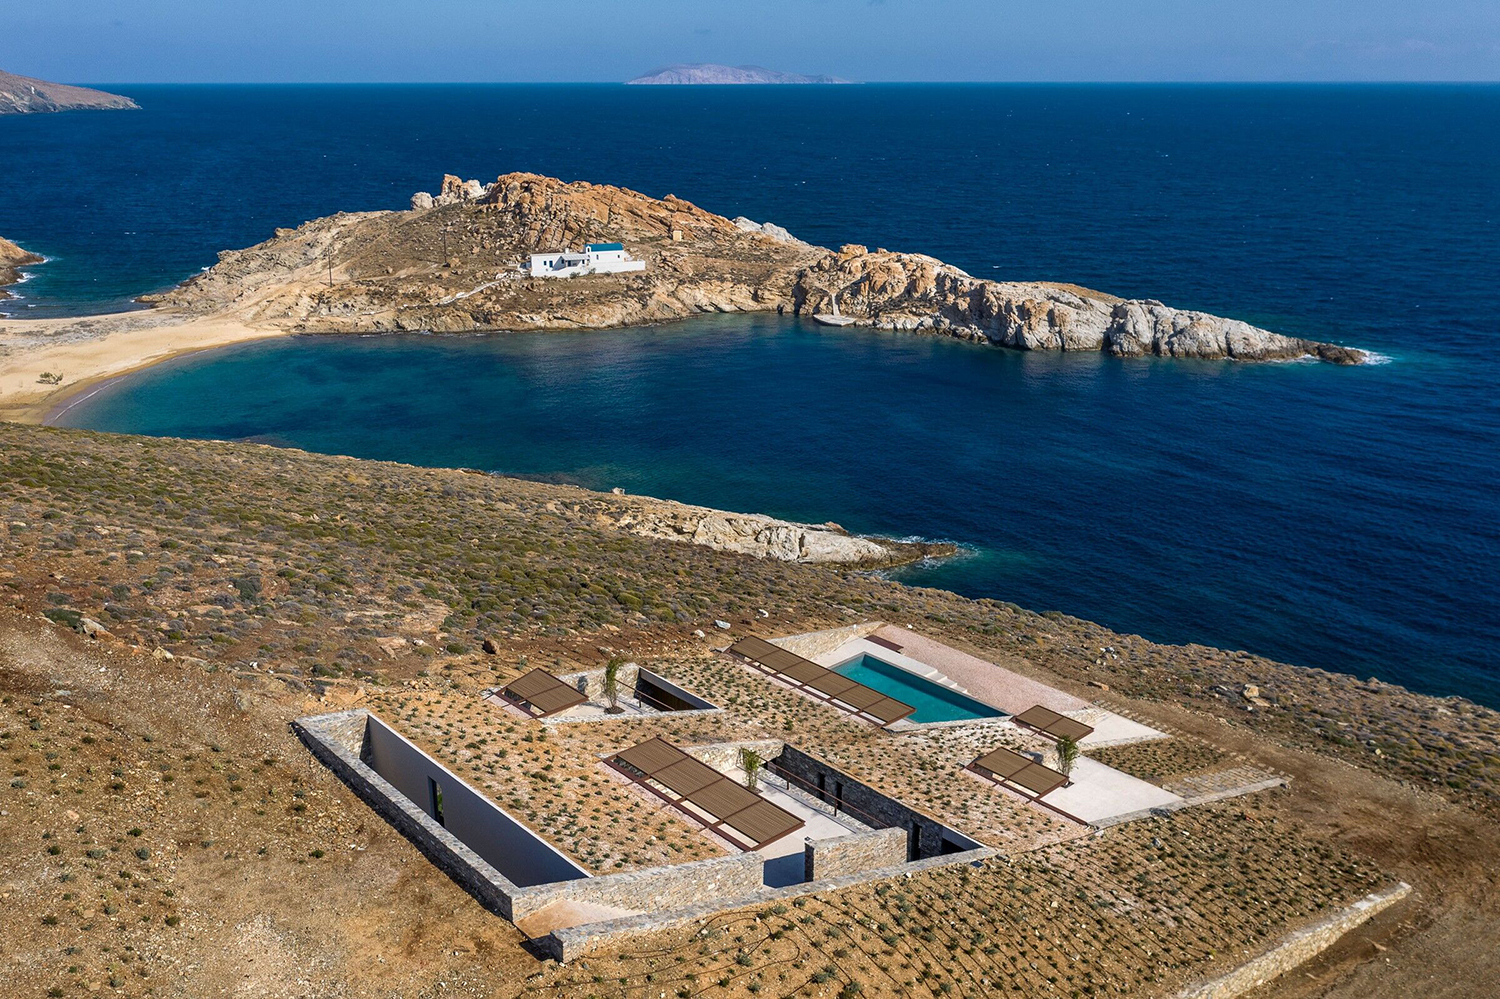 NCaved House, Serifos, Greece / Mold Architects